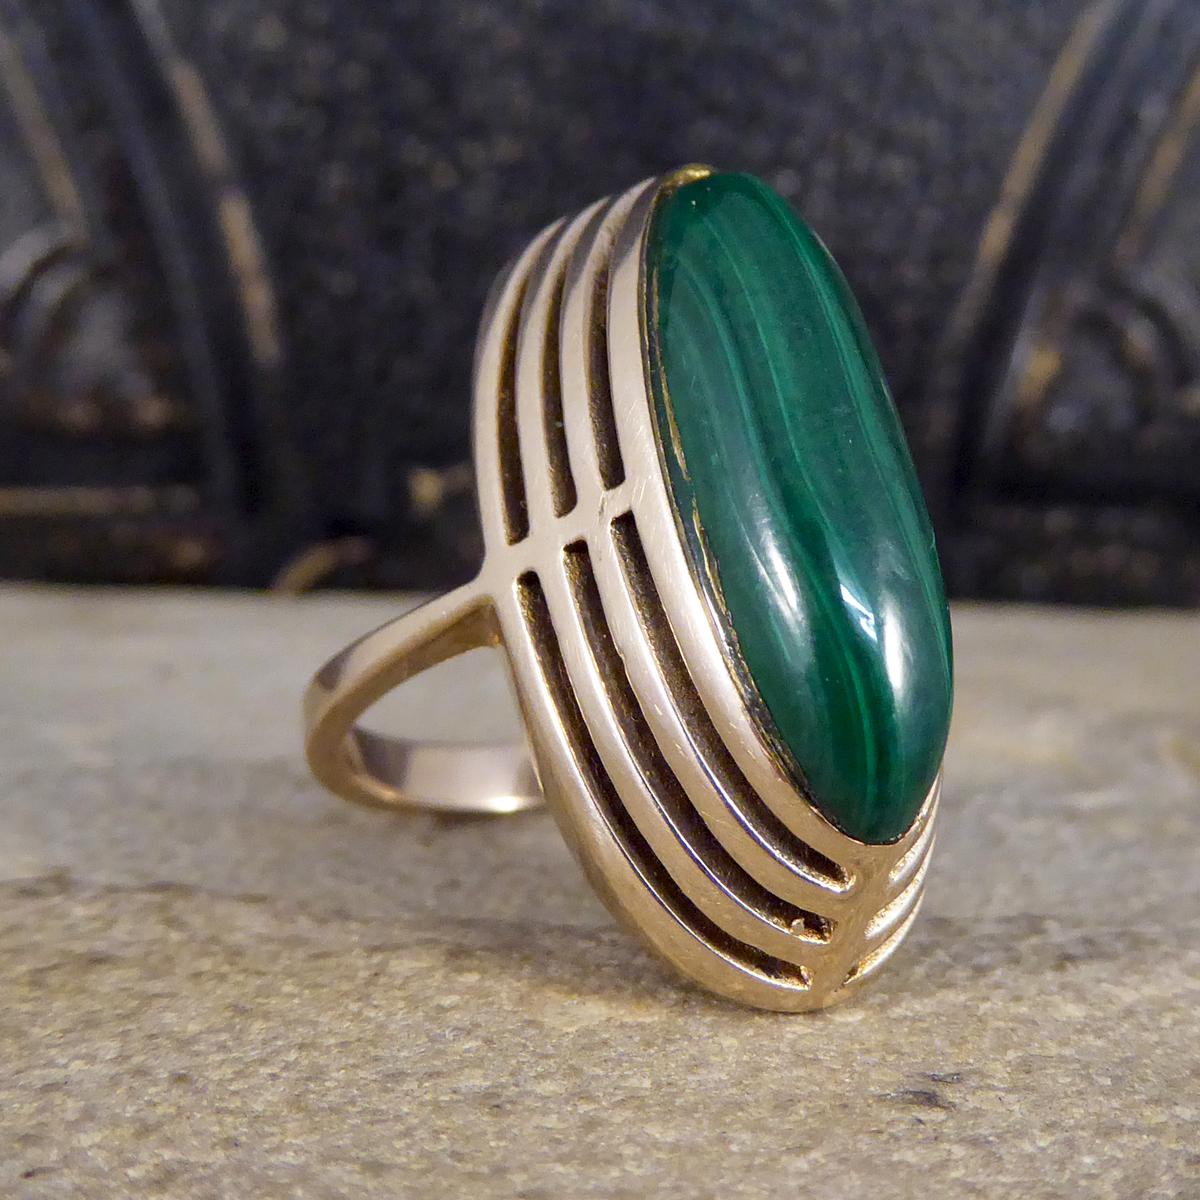 This lovely little ring has been crafted in the Art Deco era with marks of 9ct stamped on the inner band. Featuring a high set mesmerising Malachite gemstone in the centre of the ring with a 9ct Yellow Gold layer detailing around. A gorgeous stand